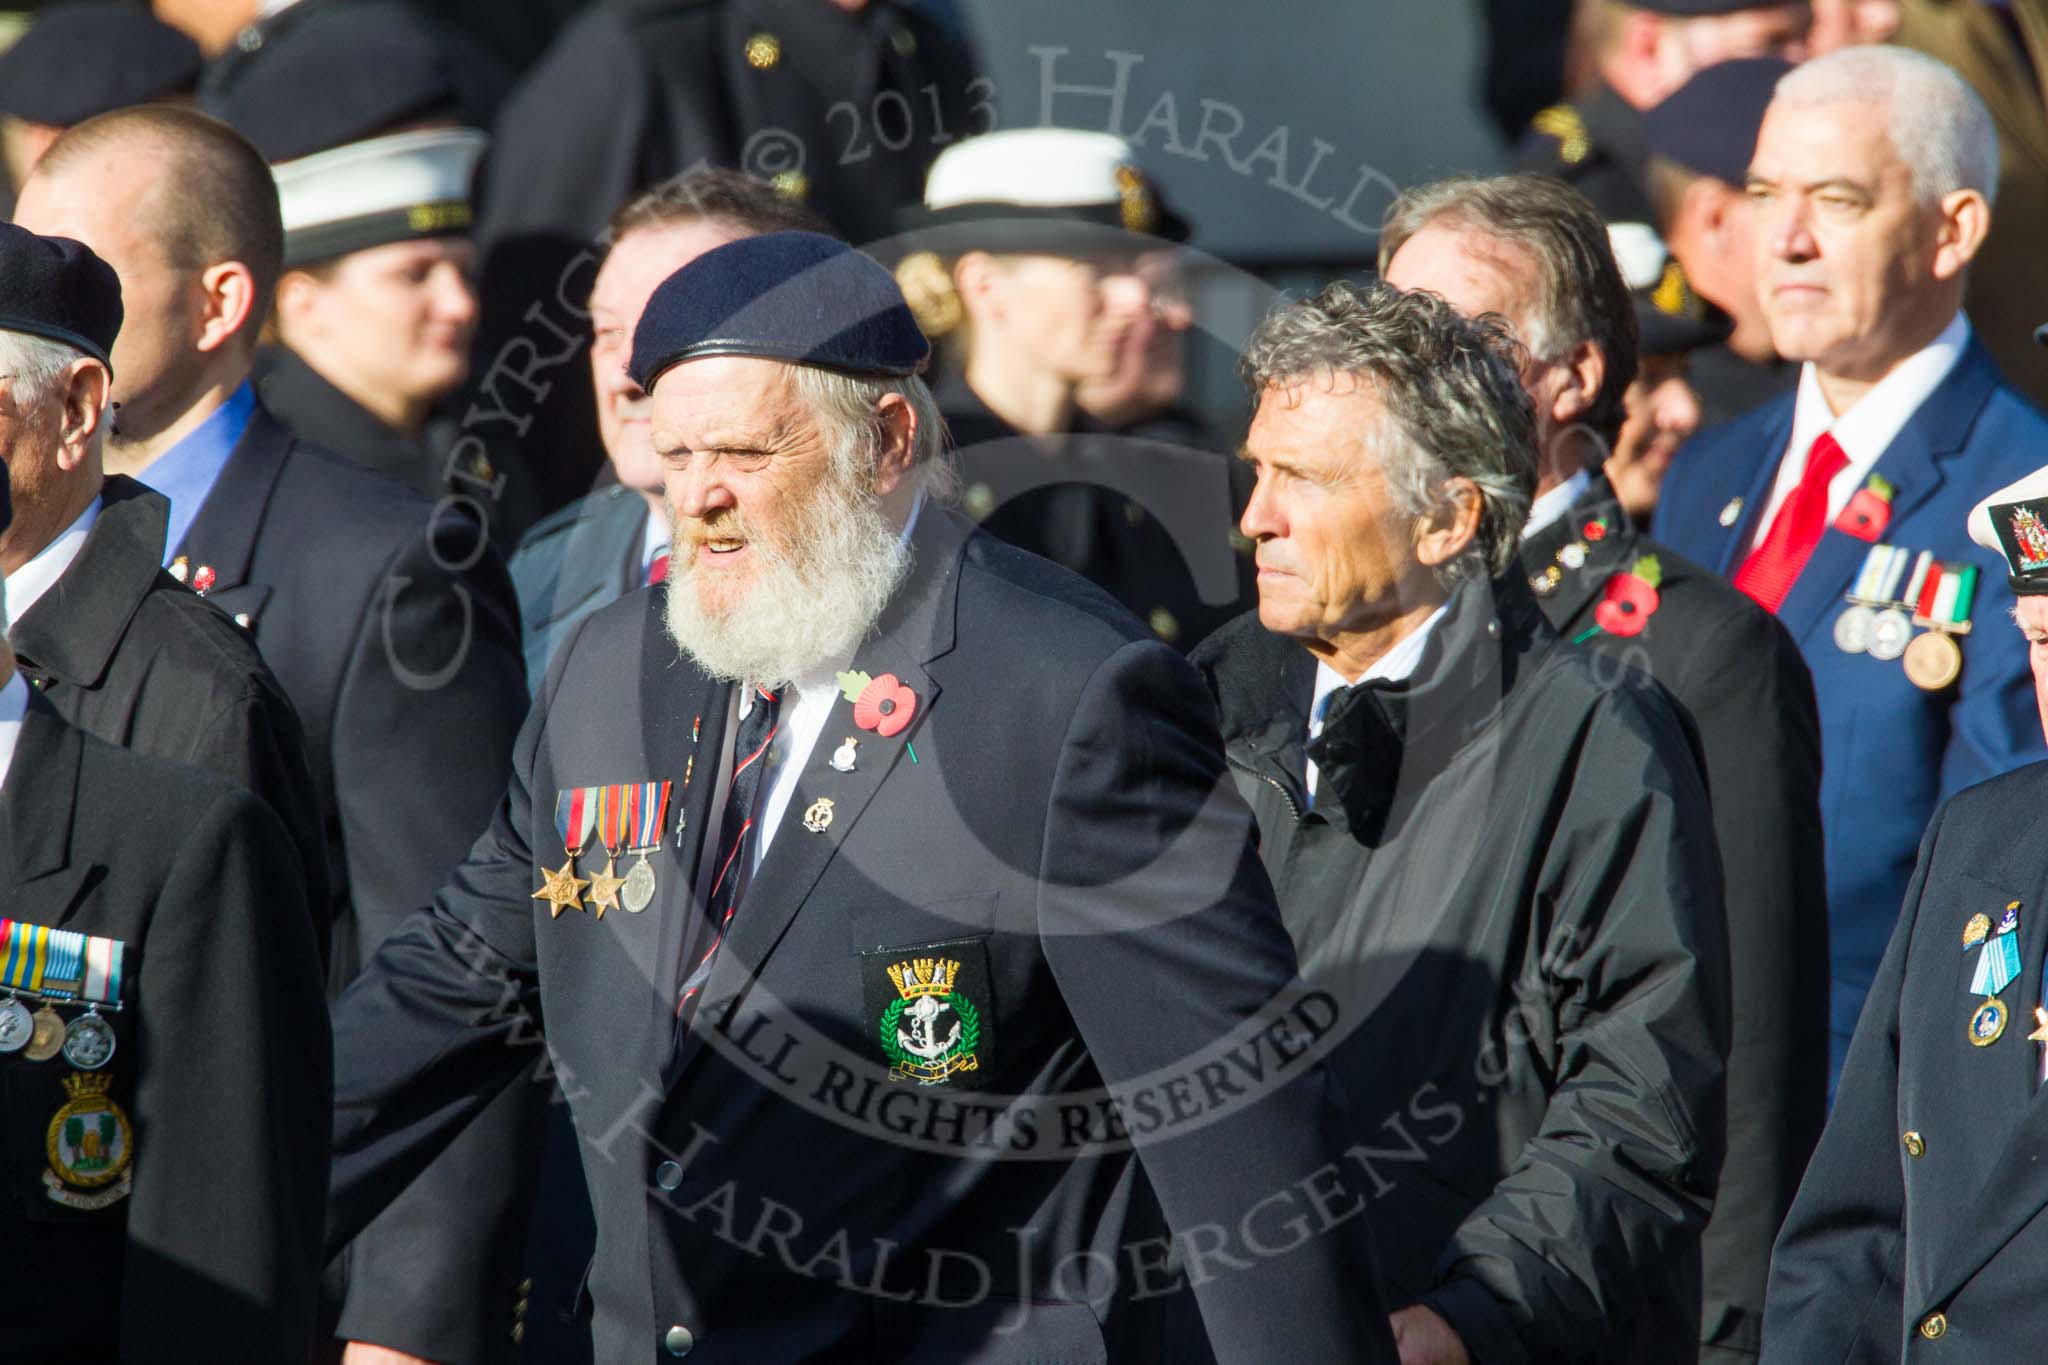 Remembrance Sunday at the Cenotaph in London 2014: Group E2 - Royal Naval Association.
Press stand opposite the Foreign Office building, Whitehall, London SW1,
London,
Greater London,
United Kingdom,
on 09 November 2014 at 11:49, image #567